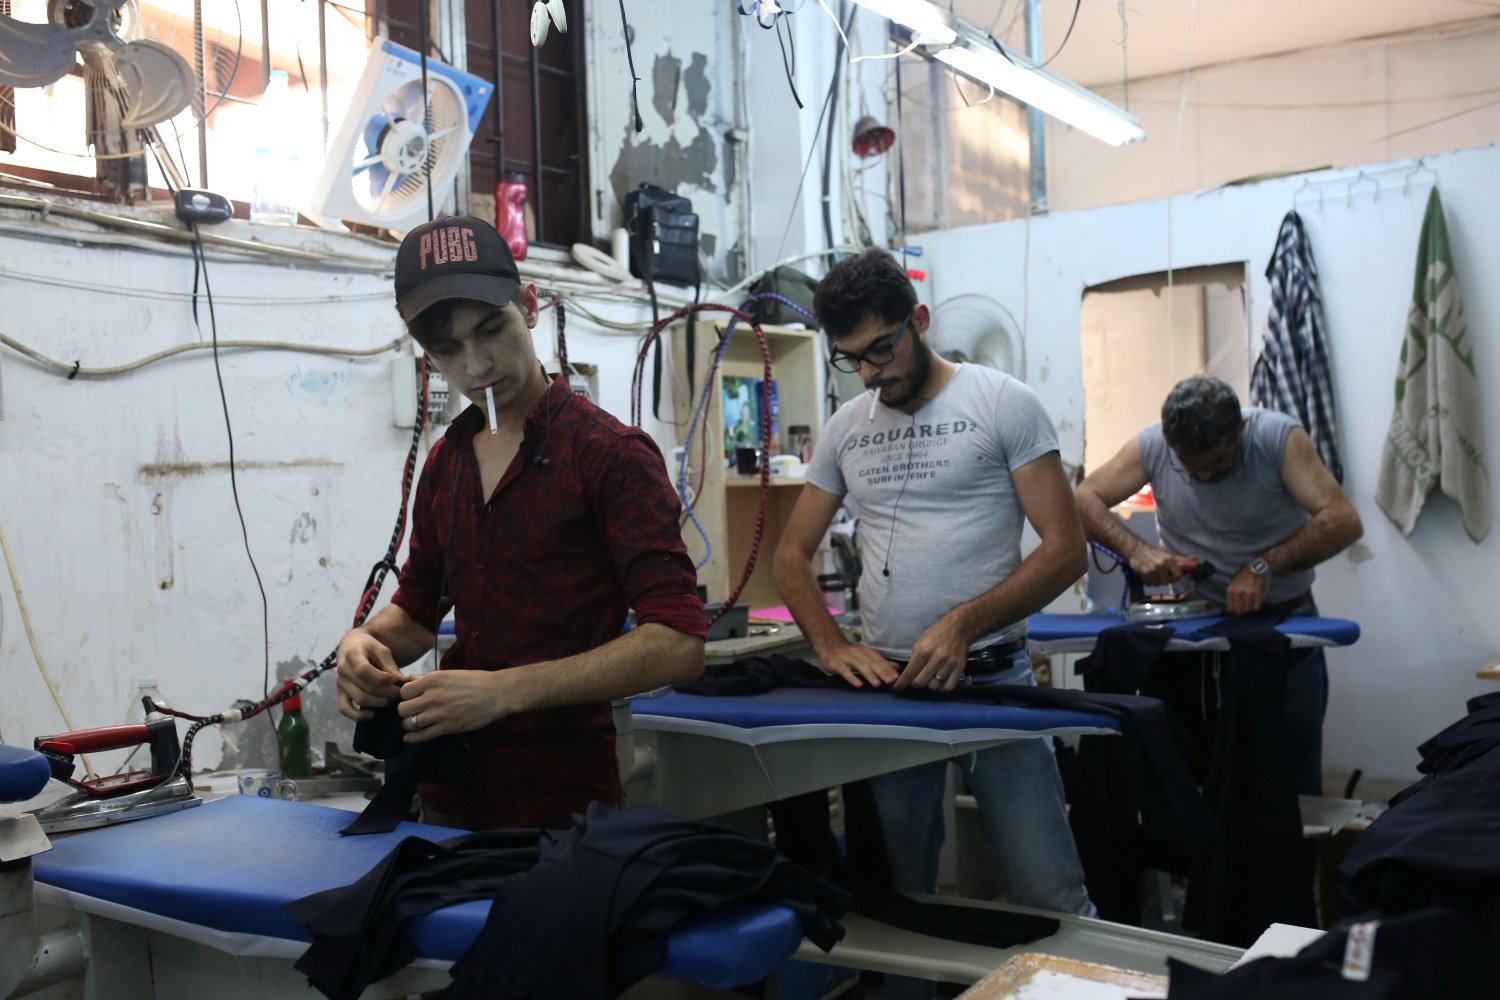 REFILE - ADDING RESTRICTIONS Syrian refugee men work at a textile workshop as day laborer in Istanbul, Turkey, June 20, 2019. REUTERS/Cansu Alkaya - RC1DF5979500